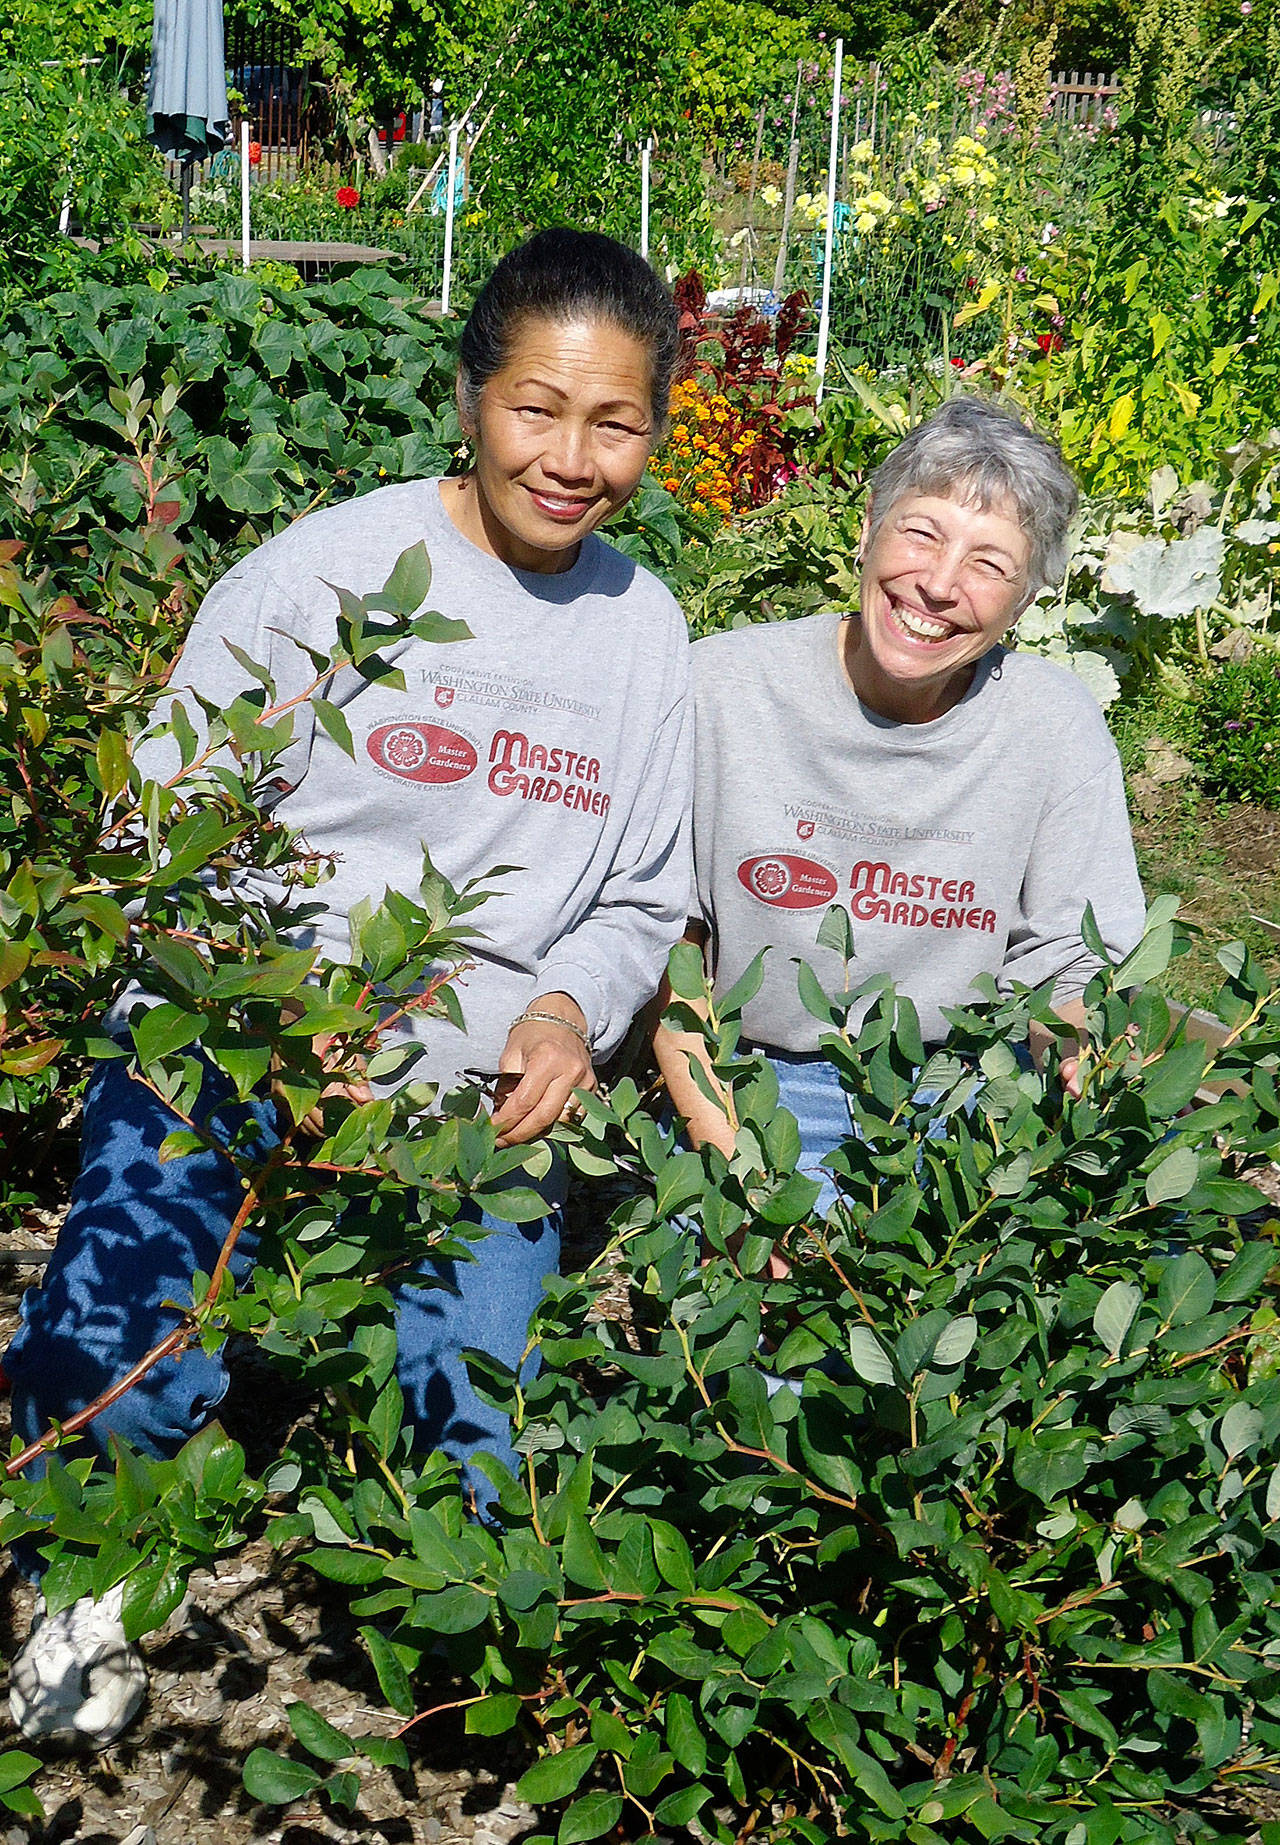 Clallam County Master Gardeners Audreen Williams, left, and Jeanette Stehr-Green will talk about growing blueberries in the Pacific Northwest at the Master Gardener Demonstration Garden on Saturday.